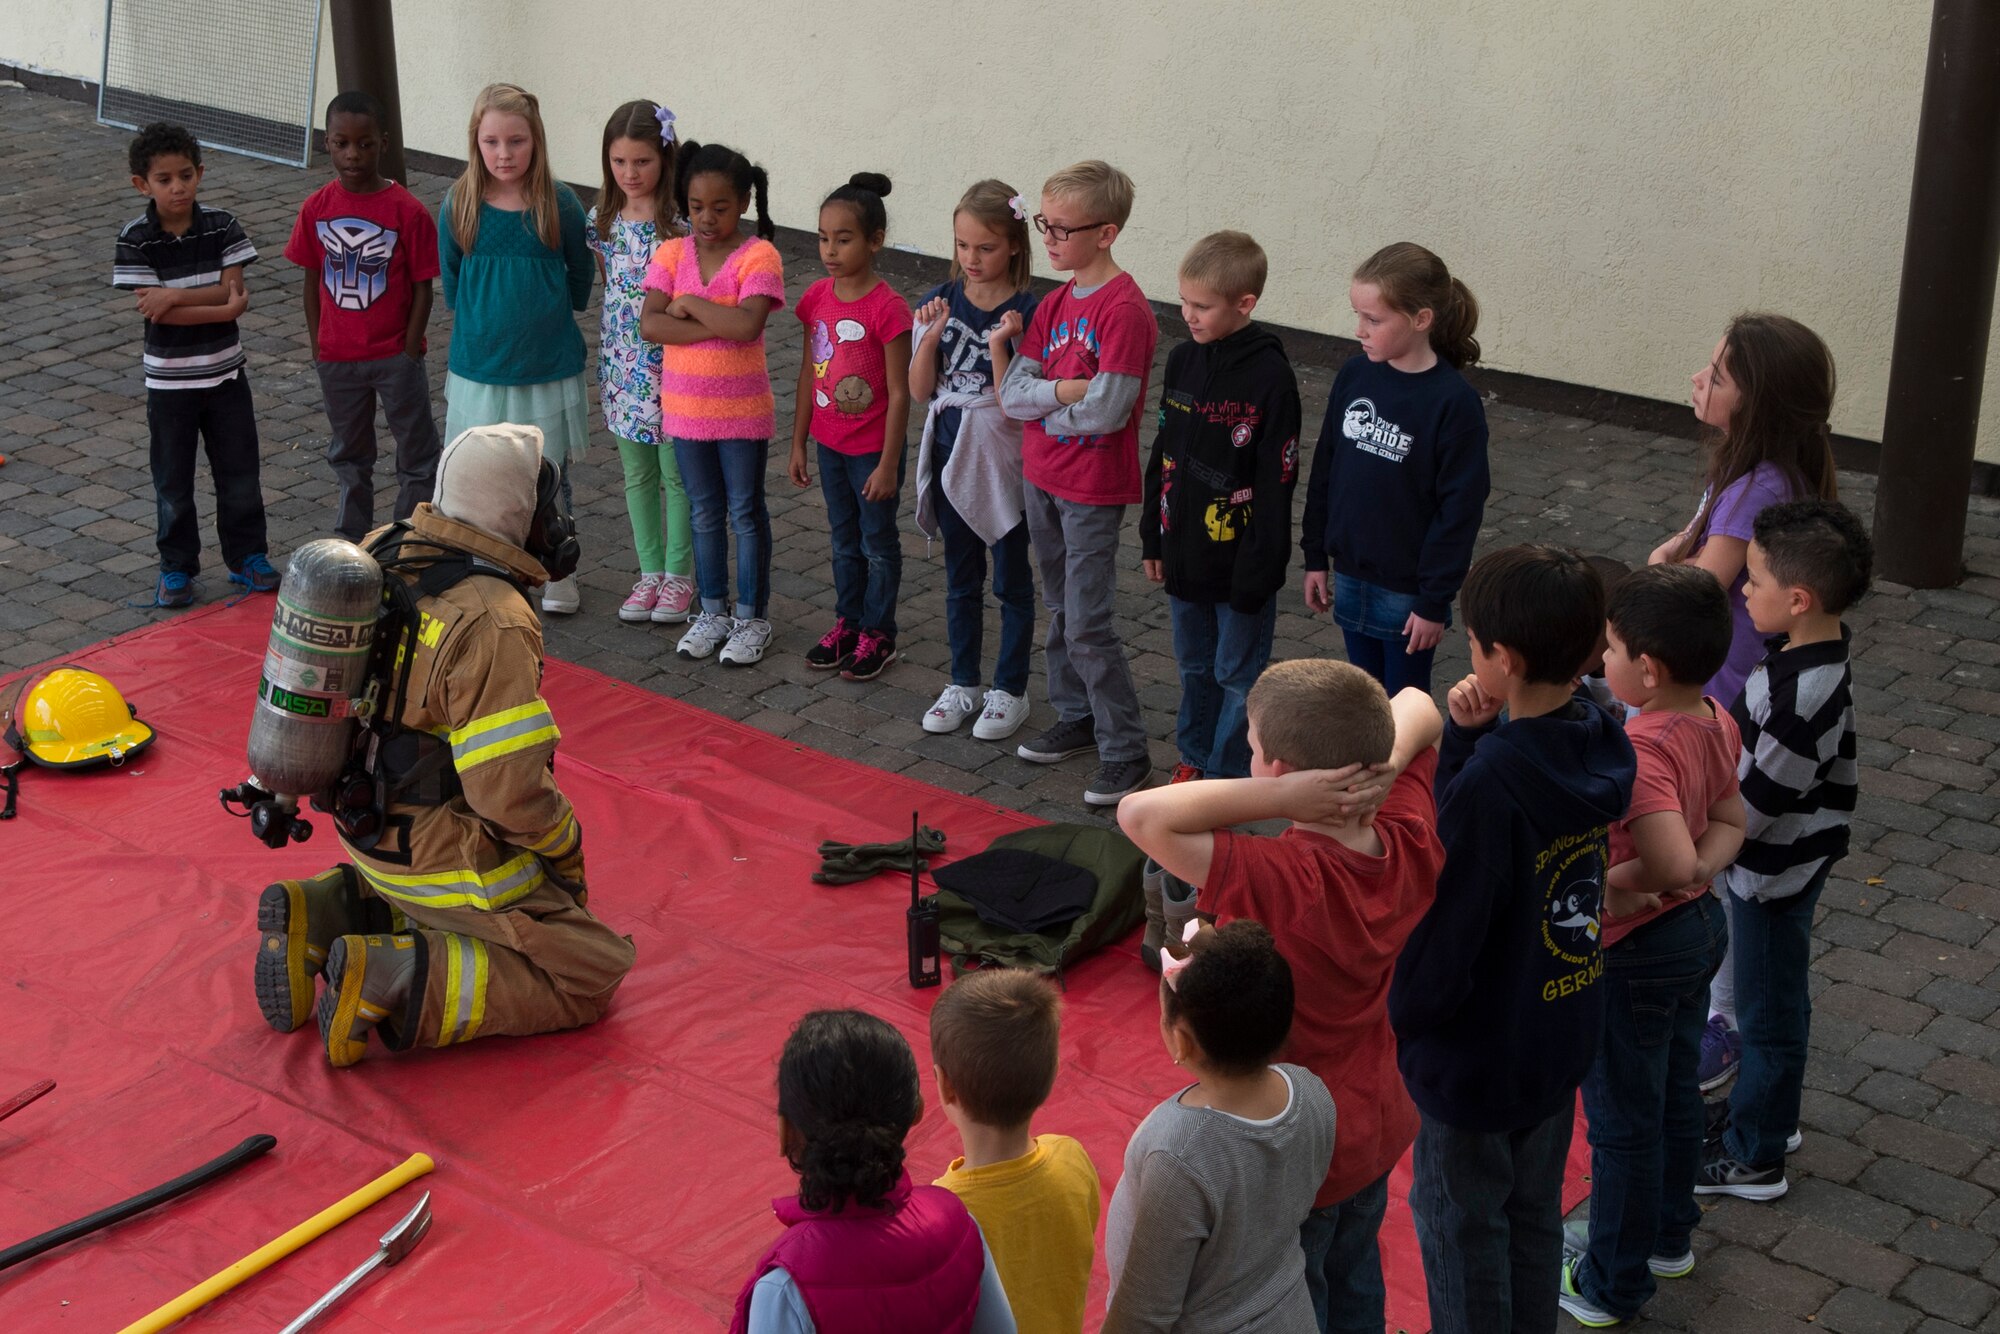 U.S. Air Force Airman 1st Class Ty Hults, a 52nd Civil Engineer Squadron firefighter, shows Bitburg Elementary School students firefighter equipment while visiting BES on Bitburg Annex, Germany, Oct. 8, 2015. U.S. Air Force Col. Joe McFall, 52nd Fighter Wing commander, proclaimed Oct. 4-10 as Fire Prevention Week which included school visits and fire-safety demonstrations in front of the Exchange by the Spangdahlem Fire Department. (U.S. Air Force photo by Airman 1st Class Luke J. Kitterman/Released)